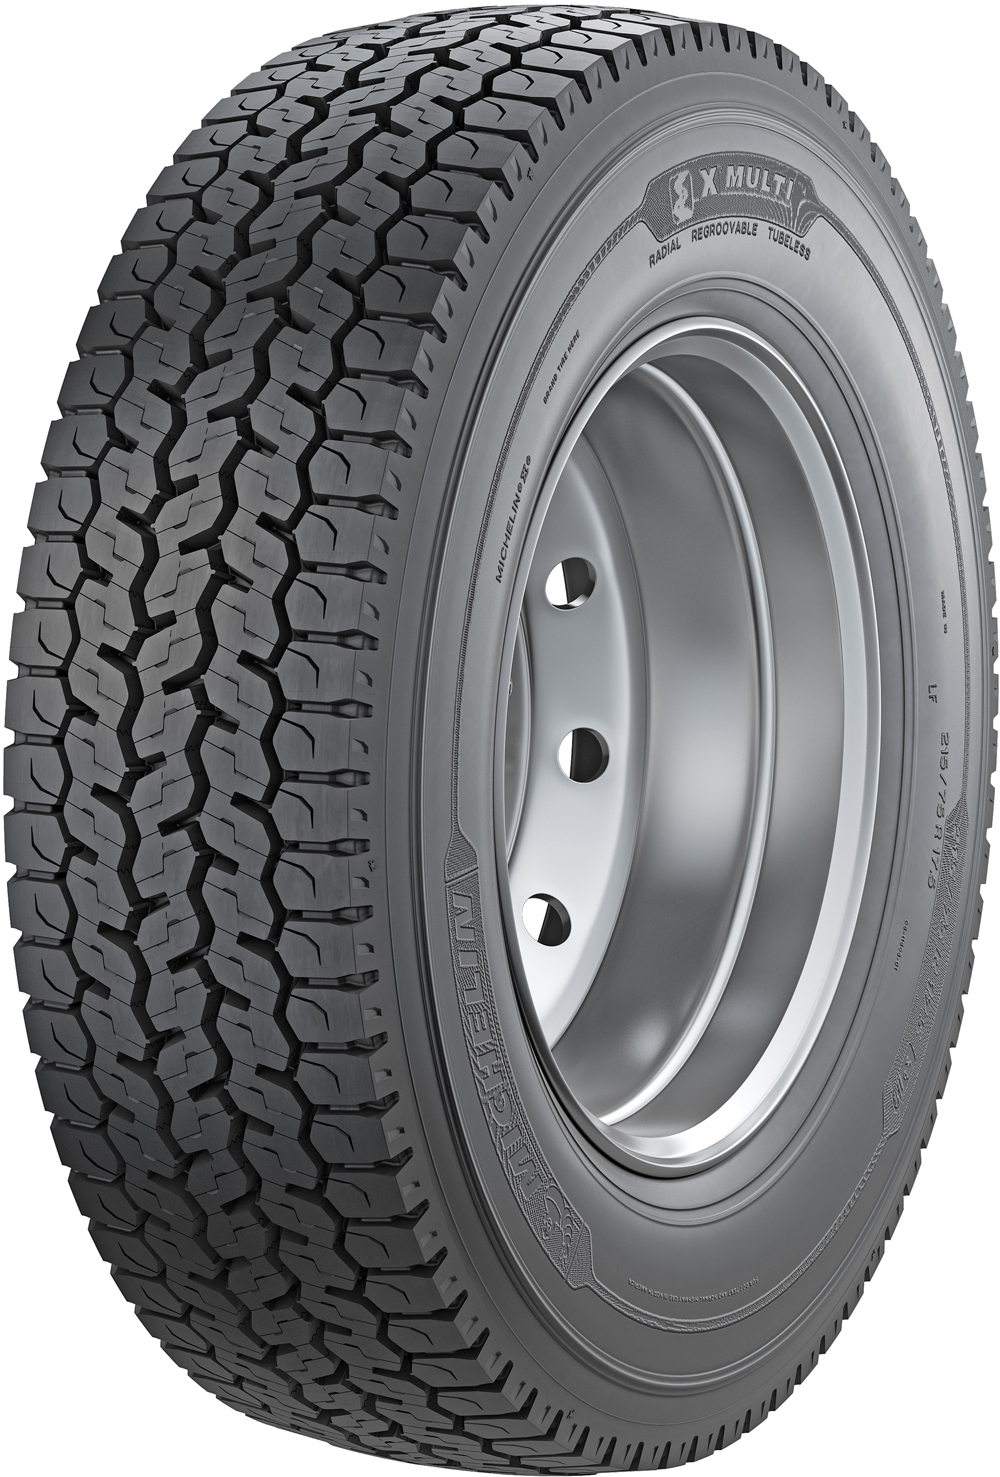 product_type-heavy_tires MICHELIN X MULTI D VG 205/75 R17.5 124M